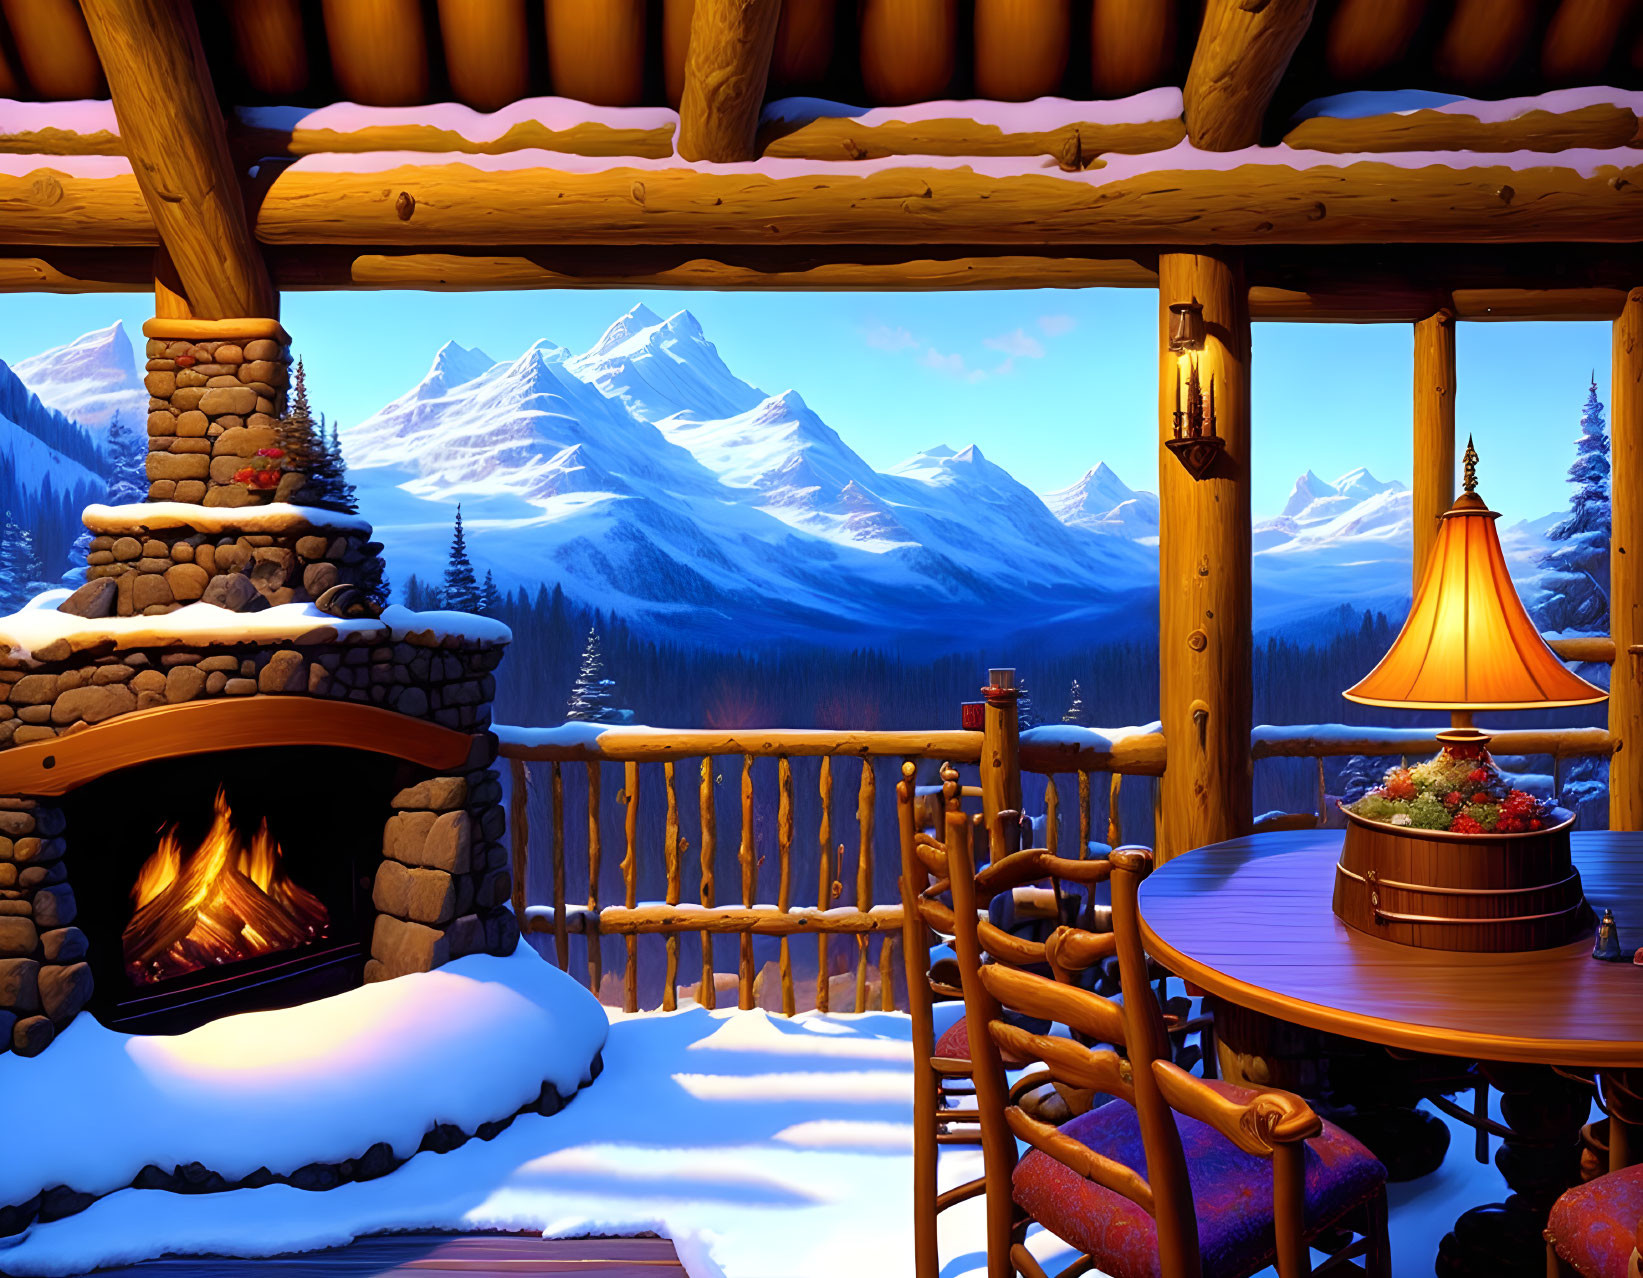 Mountain lodge porch with fireplace, lamp, and snowy peak view at dusk